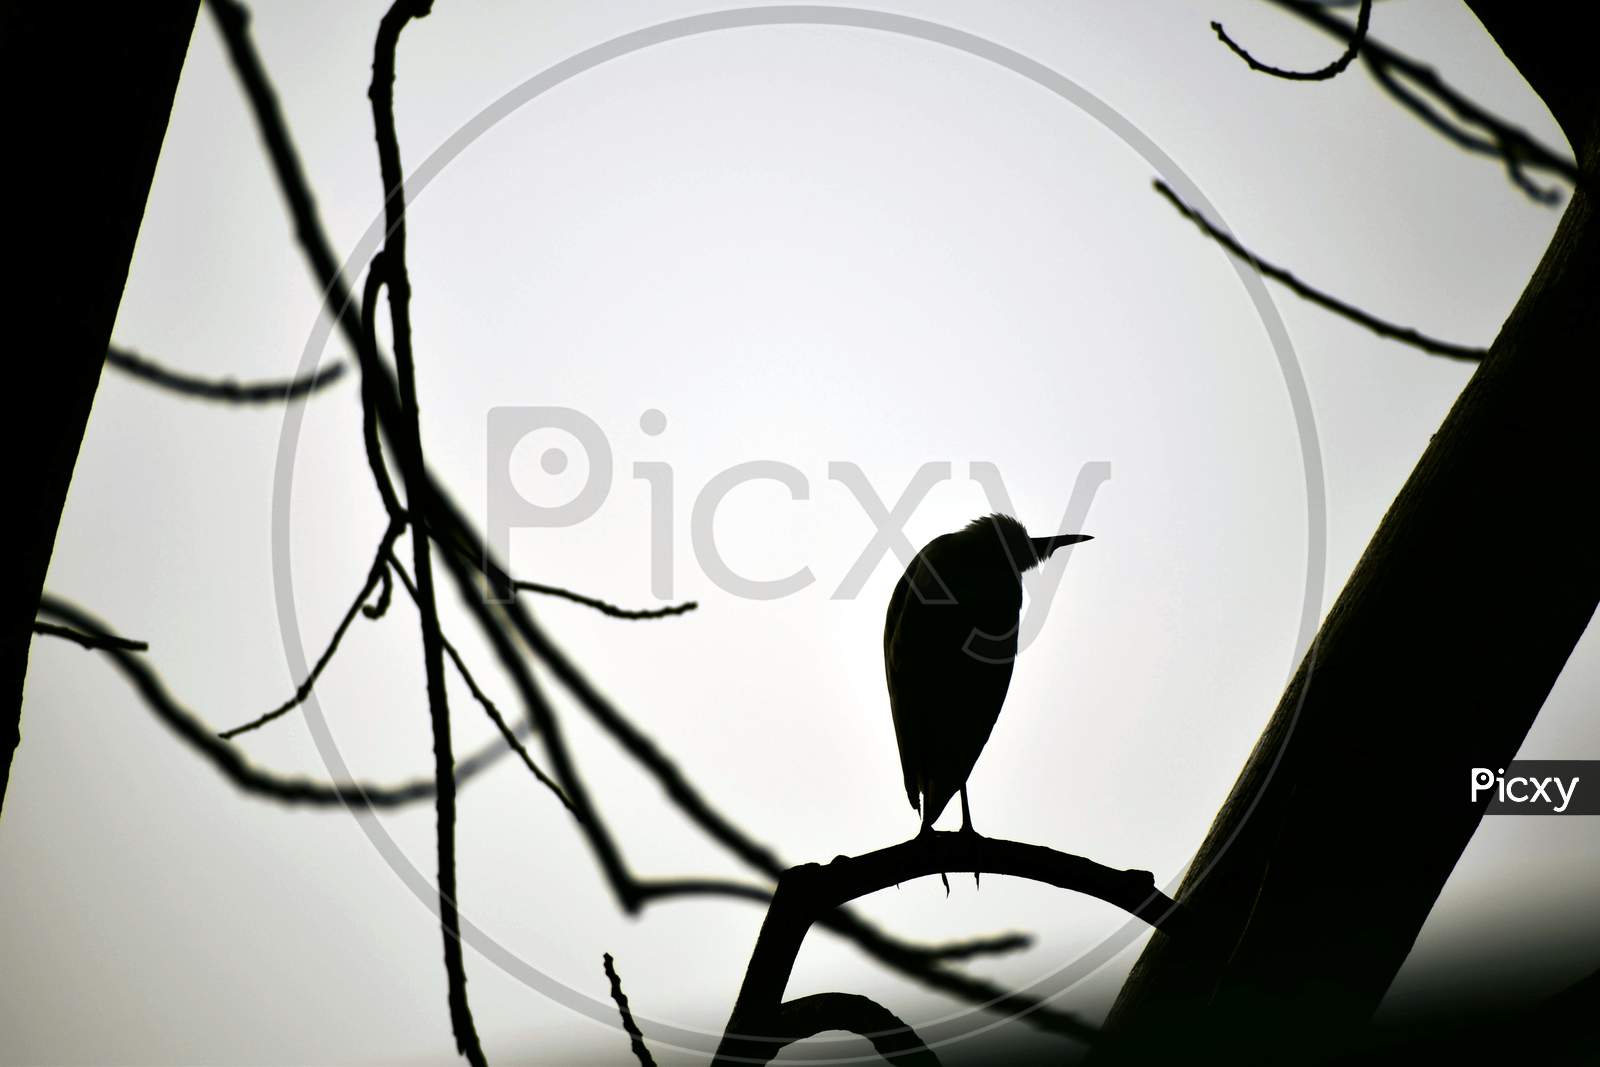 Beautiful Picture Of Bird Sitting On Tree Branch. Isolated On White Background. Selective Focus On Subject